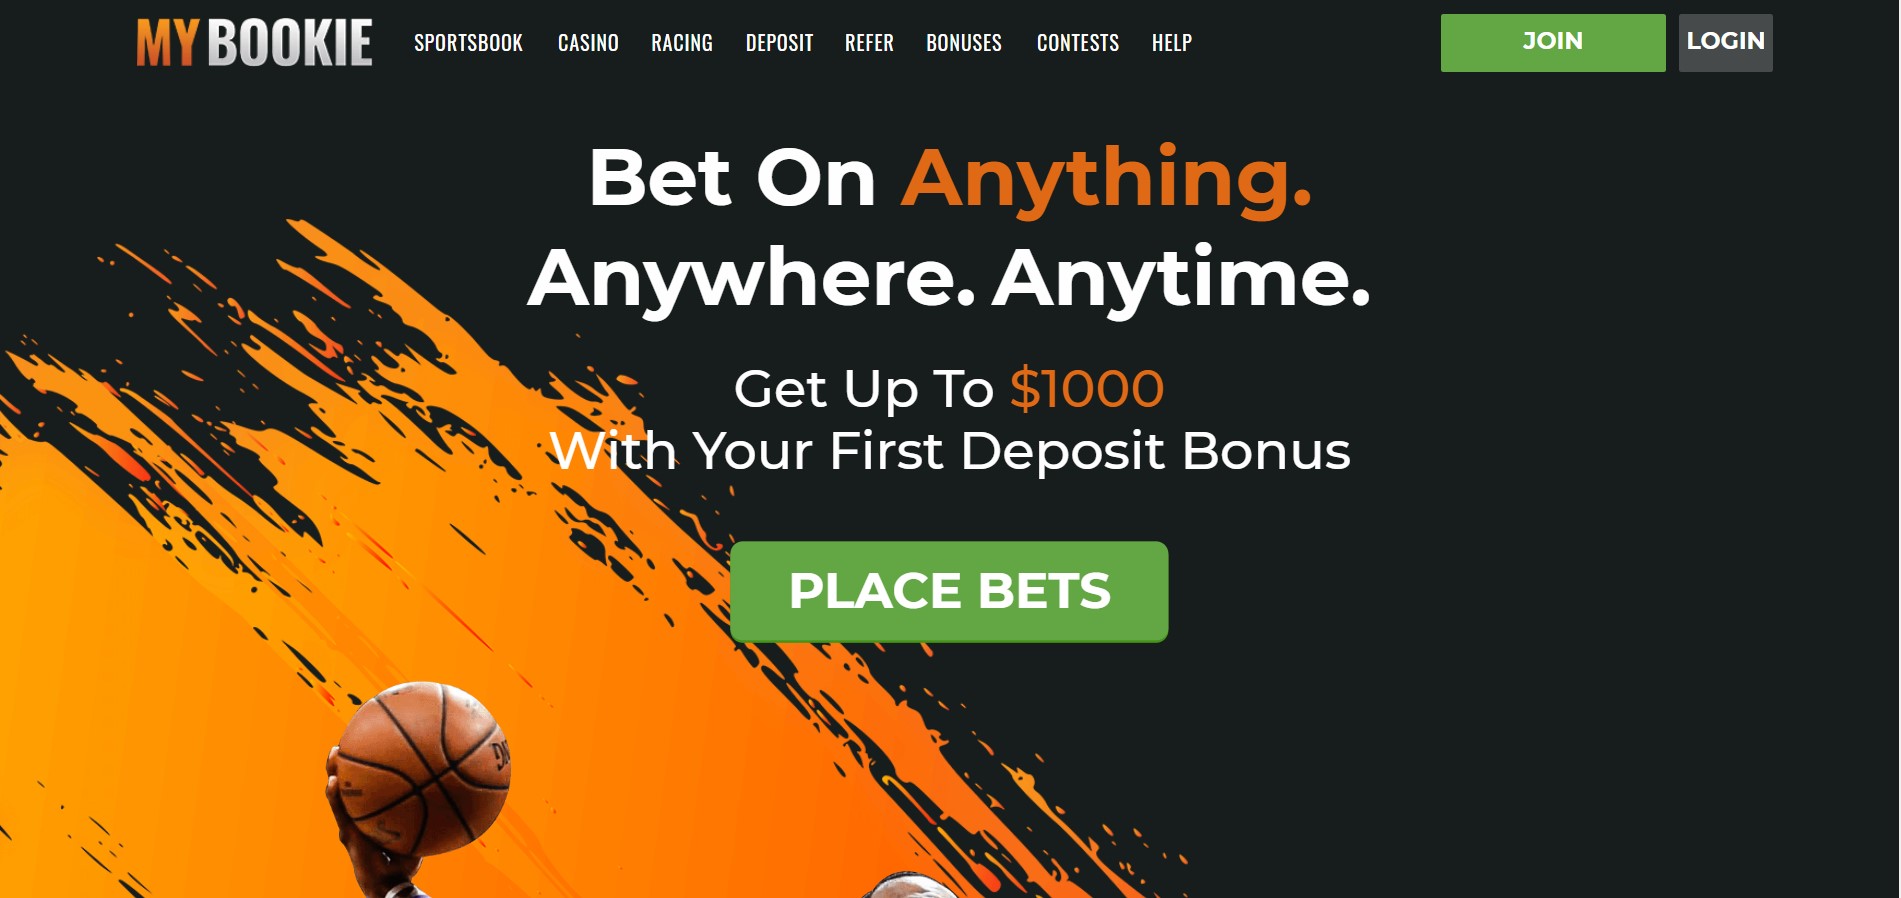 MyBookie Review - Check Out What Platform Offers